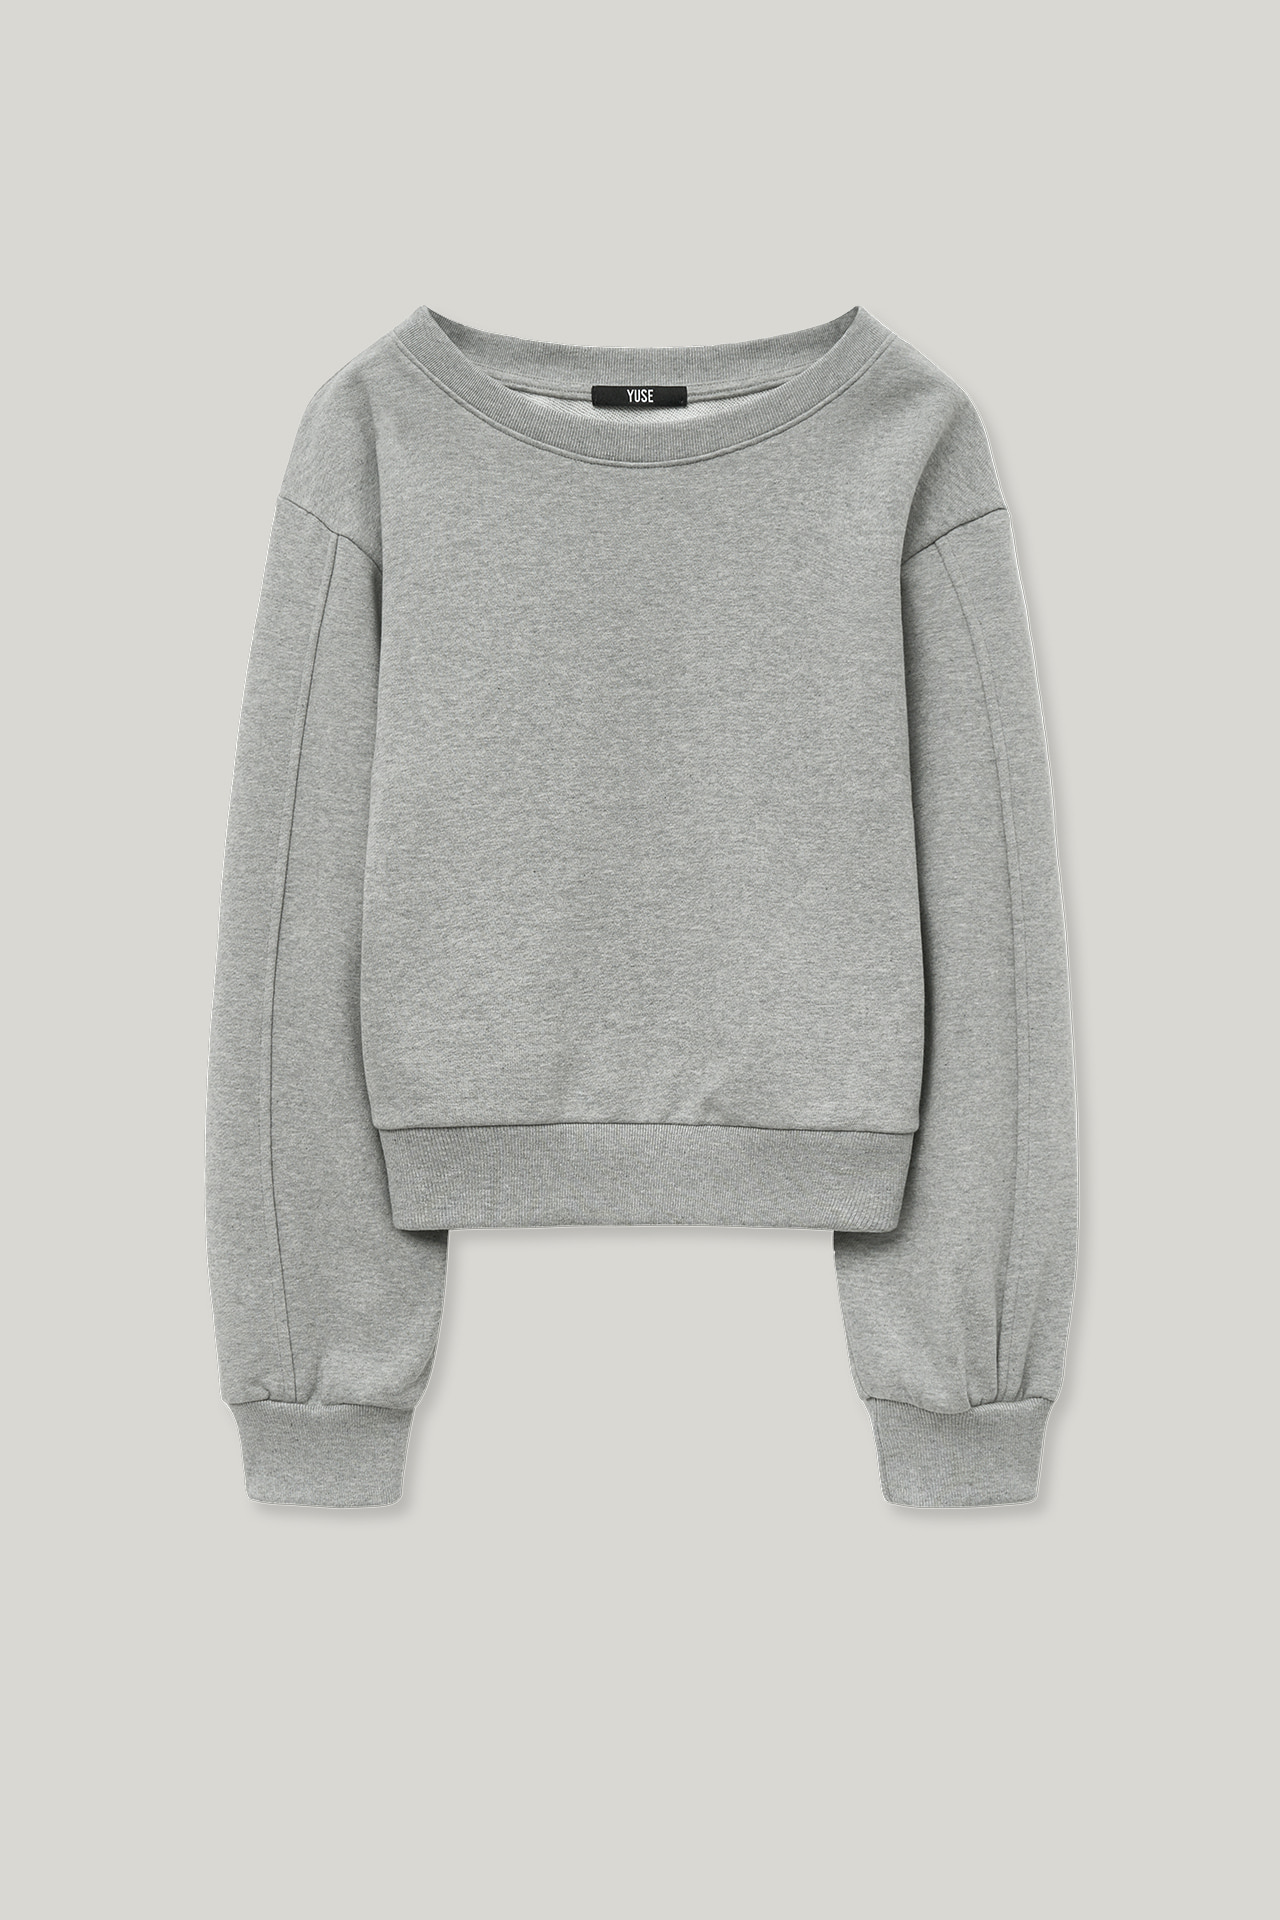 [RE:YUSE] BASIC RECYCLE OFF SHOULDER SWEAT SHIRT TOP - GRAY